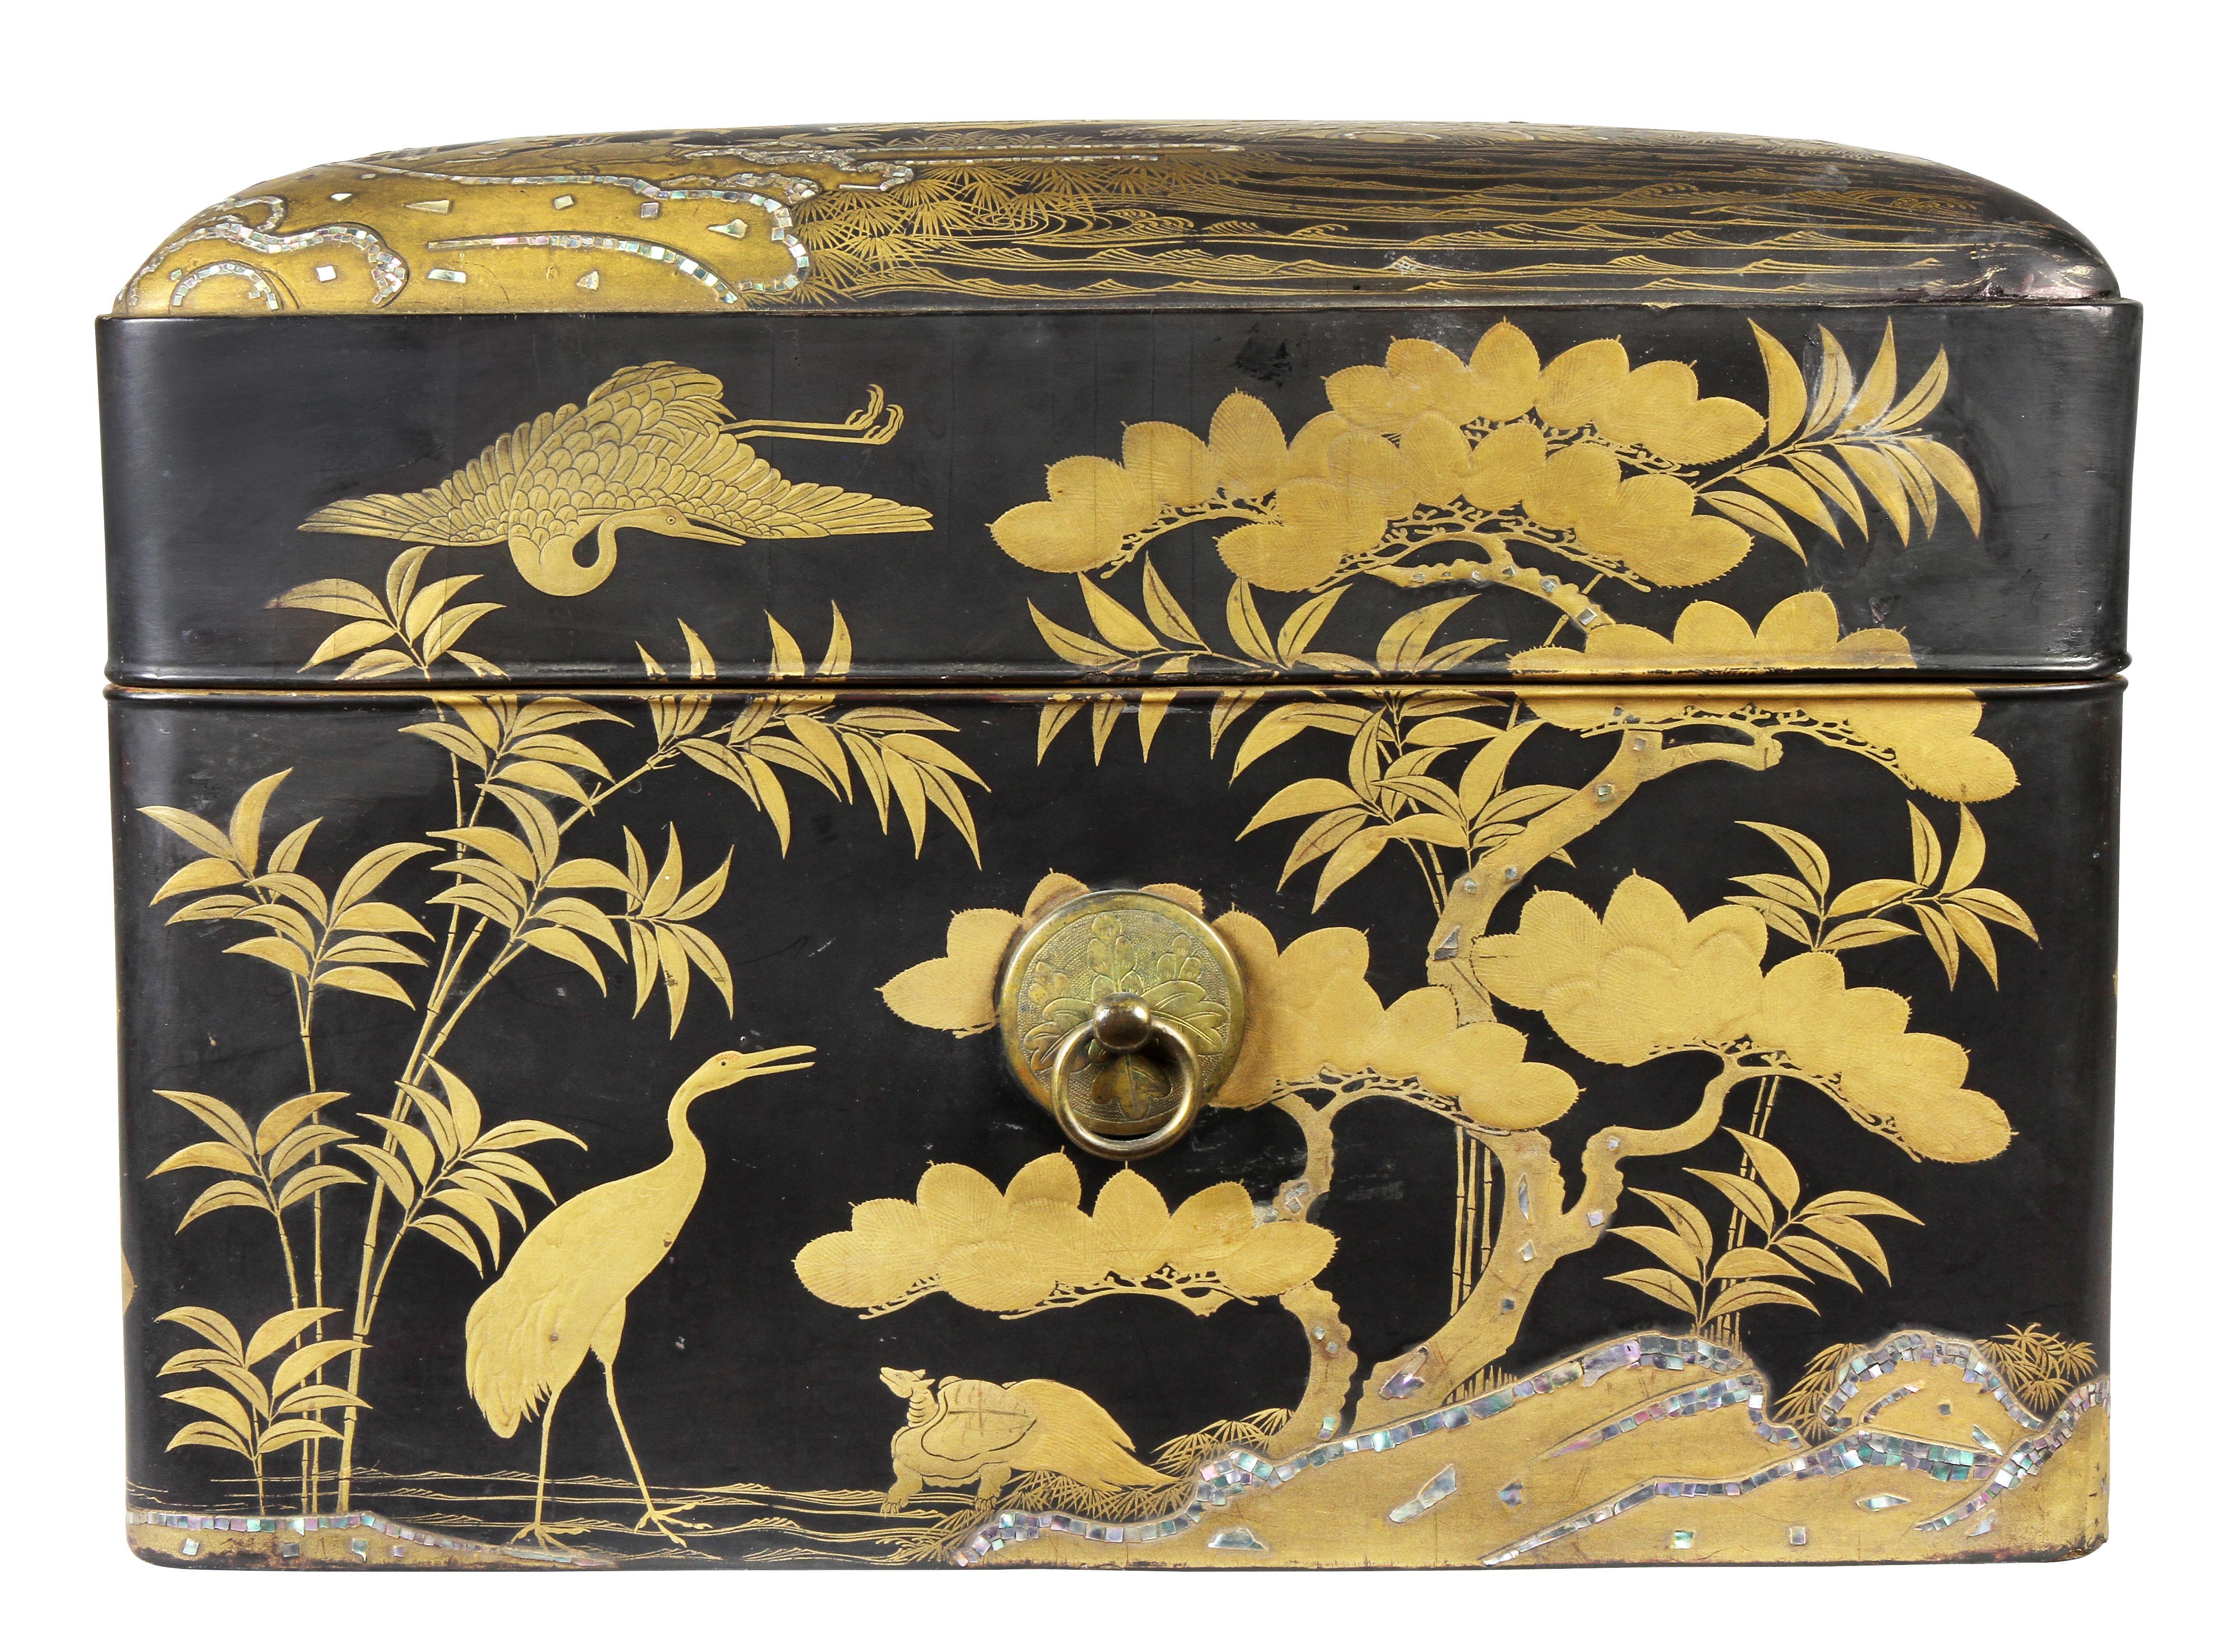 Decorated overall with gilt and mother of pearl decoration on a black ground with cranes and trees.